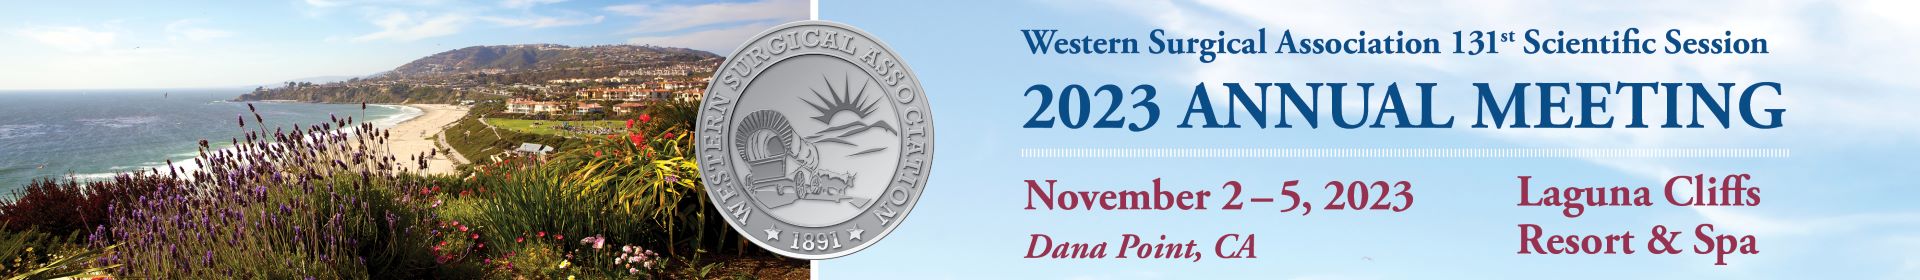 WSA 2023 Annual Meeting Event Banner